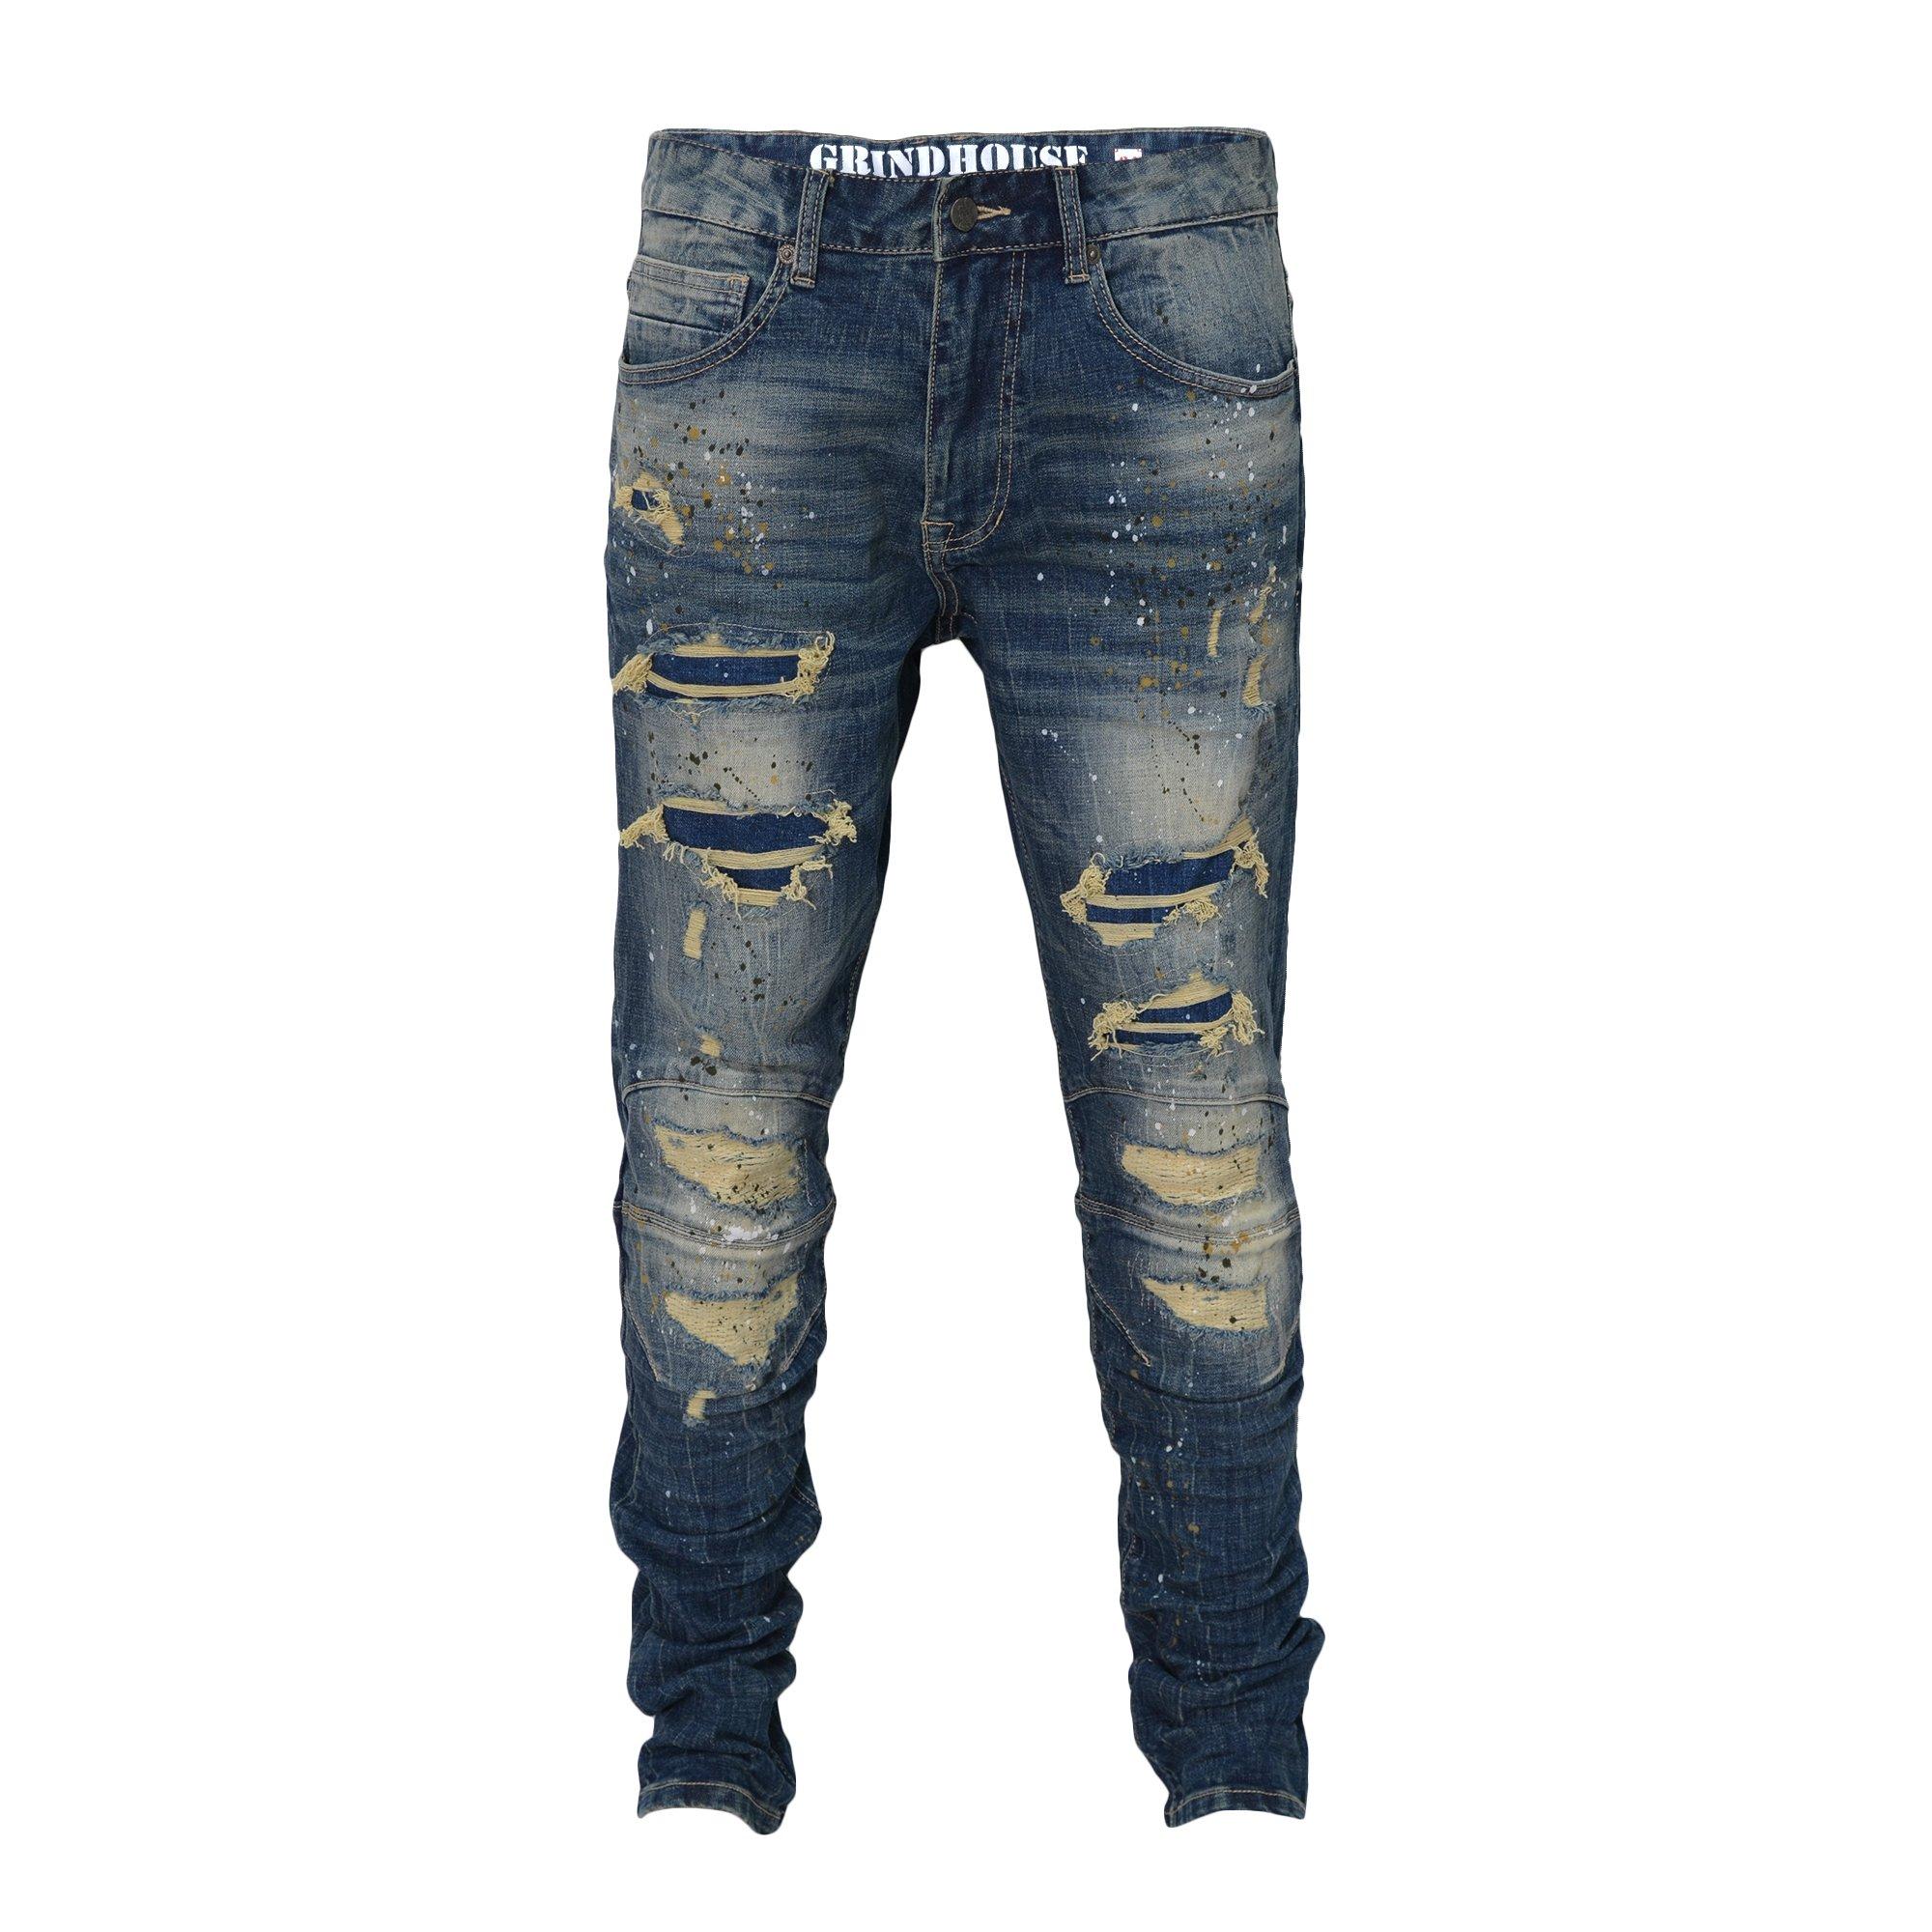 ws gold jeans price